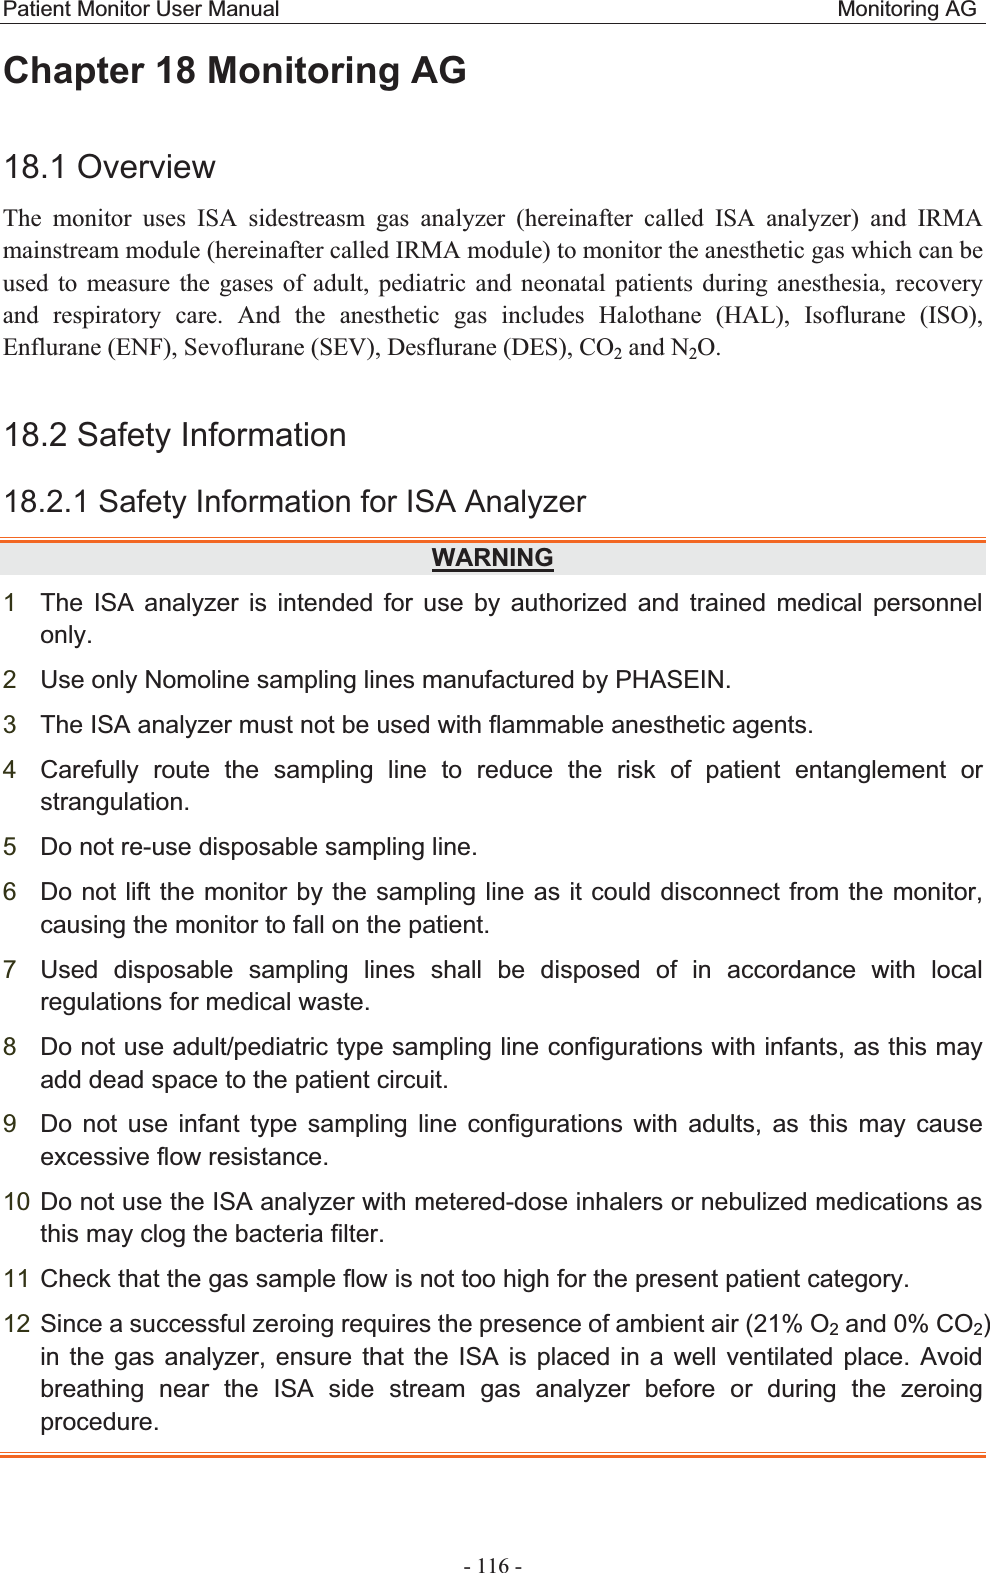 Patient Monitor User Manual                                                   Monitoring AG  - 116 - Chapter 18 Monitoring AG18.1 Overview The monitor uses ISA sidestreasm gas analyzer (hereinafter called ISA analyzer) and IRMA mainstream module (hereinafter called IRMA module) to monitor the anesthetic gas which can be used to measure the gases of adult, pediatric and neonatal patients during anesthesia, recovery and respiratory care. And the anesthetic gas includes Halothane (HAL), Isoflurane (ISO), Enflurane (ENF), Sevoflurane (SEV), Desflurane (DES), CO2 and N2O.  18.2 Safety Information   18.2.1 Safety Information for ISA Analyzer   WARNING1The ISA analyzer is intended for use by authorized and trained medical personnel only.  2Use only Nomoline sampling lines manufactured by PHASEIN. 3The ISA analyzer must not be used with flammable anesthetic agents. 4Carefully route the sampling line to reduce the risk of patient entanglement or strangulation.5Do not re-use disposable sampling line. 6Do not lift the monitor by the sampling line as it could disconnect from the monitor, causing the monitor to fall on the patient. 7Used disposable sampling lines shall be disposed of in accordance with local regulations for medical waste. 8Do not use adult/pediatric type sampling line configurations with infants, as this may add dead space to the patient circuit. 9Do not use infant type sampling line configurations with adults, as this may cause excessive flow resistance. 10 Do not use the ISA analyzer with metered-dose inhalers or nebulized medications as this may clog the bacteria filter. 11 Check that the gas sample flow is not too high for the present patient category.   12 Since a successful zeroing requires the presence of ambient air (21% O2 and 0% CO2)in the gas analyzer, ensure that the ISA is placed in a well ventilated place. Avoid breathing near the ISA side stream gas analyzer before or during the zeroing procedure.